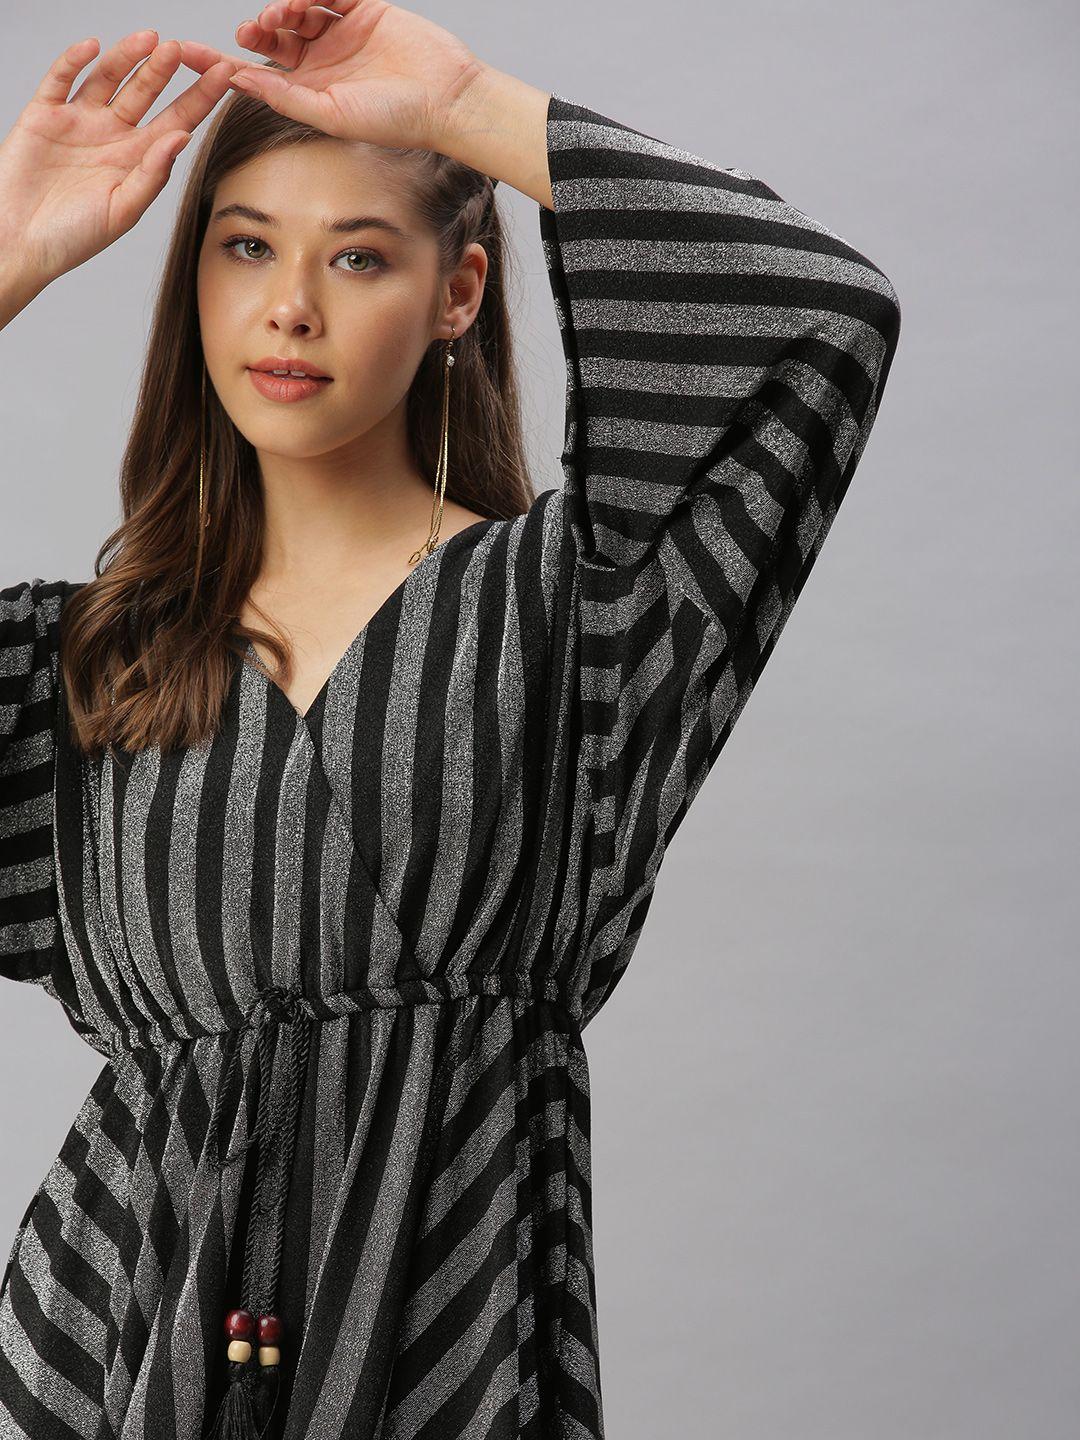 showoff silver-toned striped dress